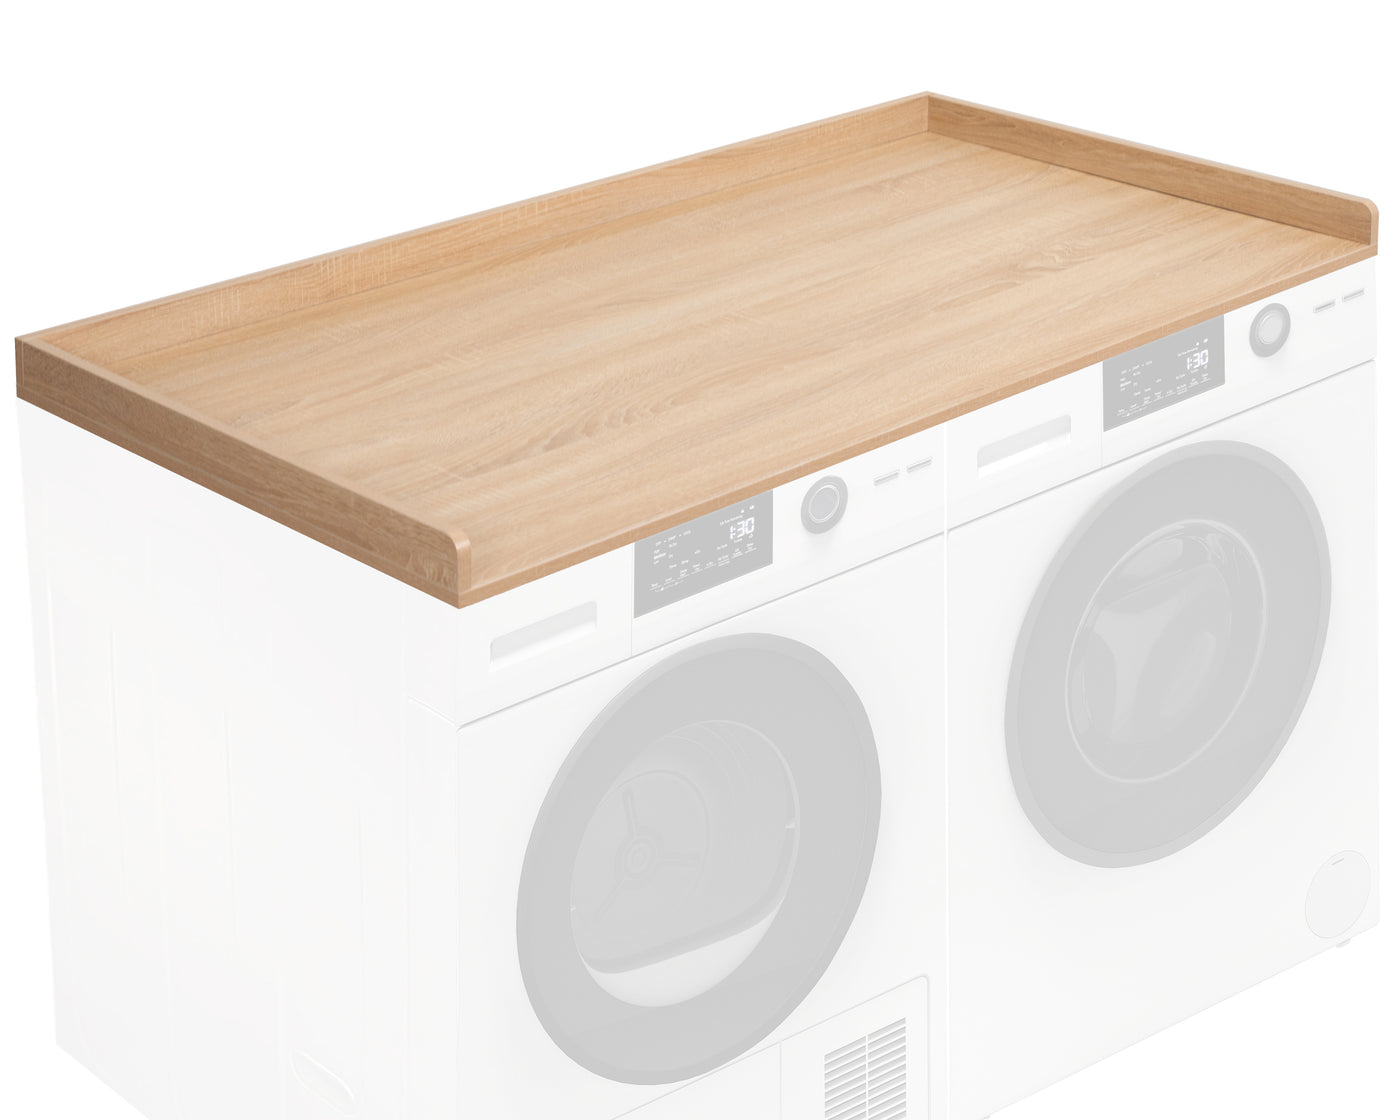 Life Finds by VIVO Light Wood Washer/Dryer Countertop